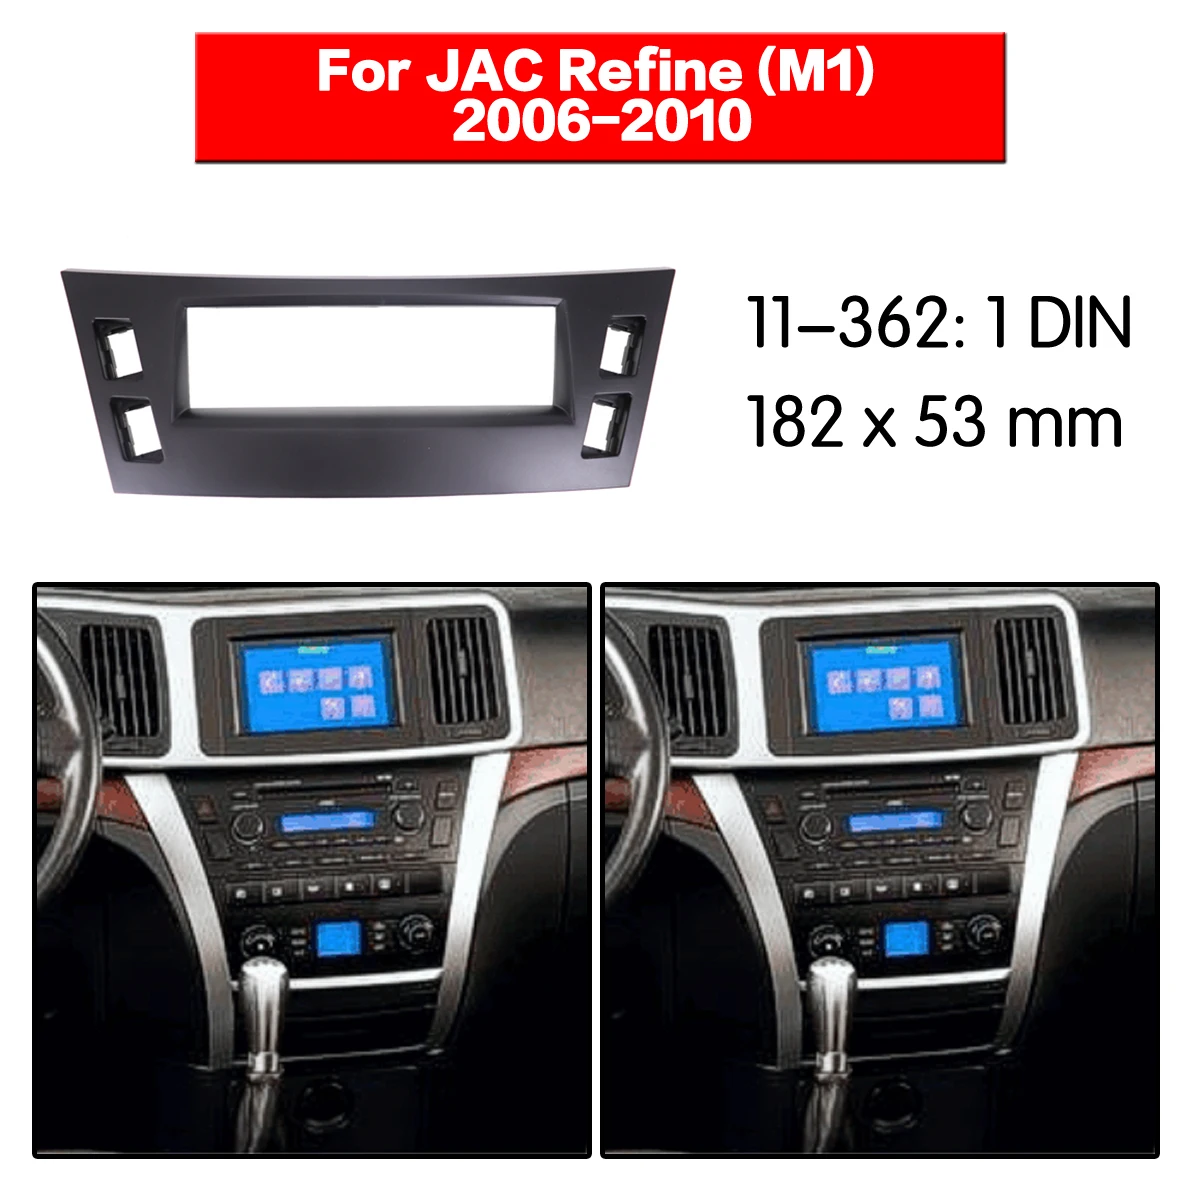 

Car Radio 2 Din Fascias Video Player Panel Cover Frame Accessories Stereo Cover Frame For JAC Refine Xiang He 2006-2010